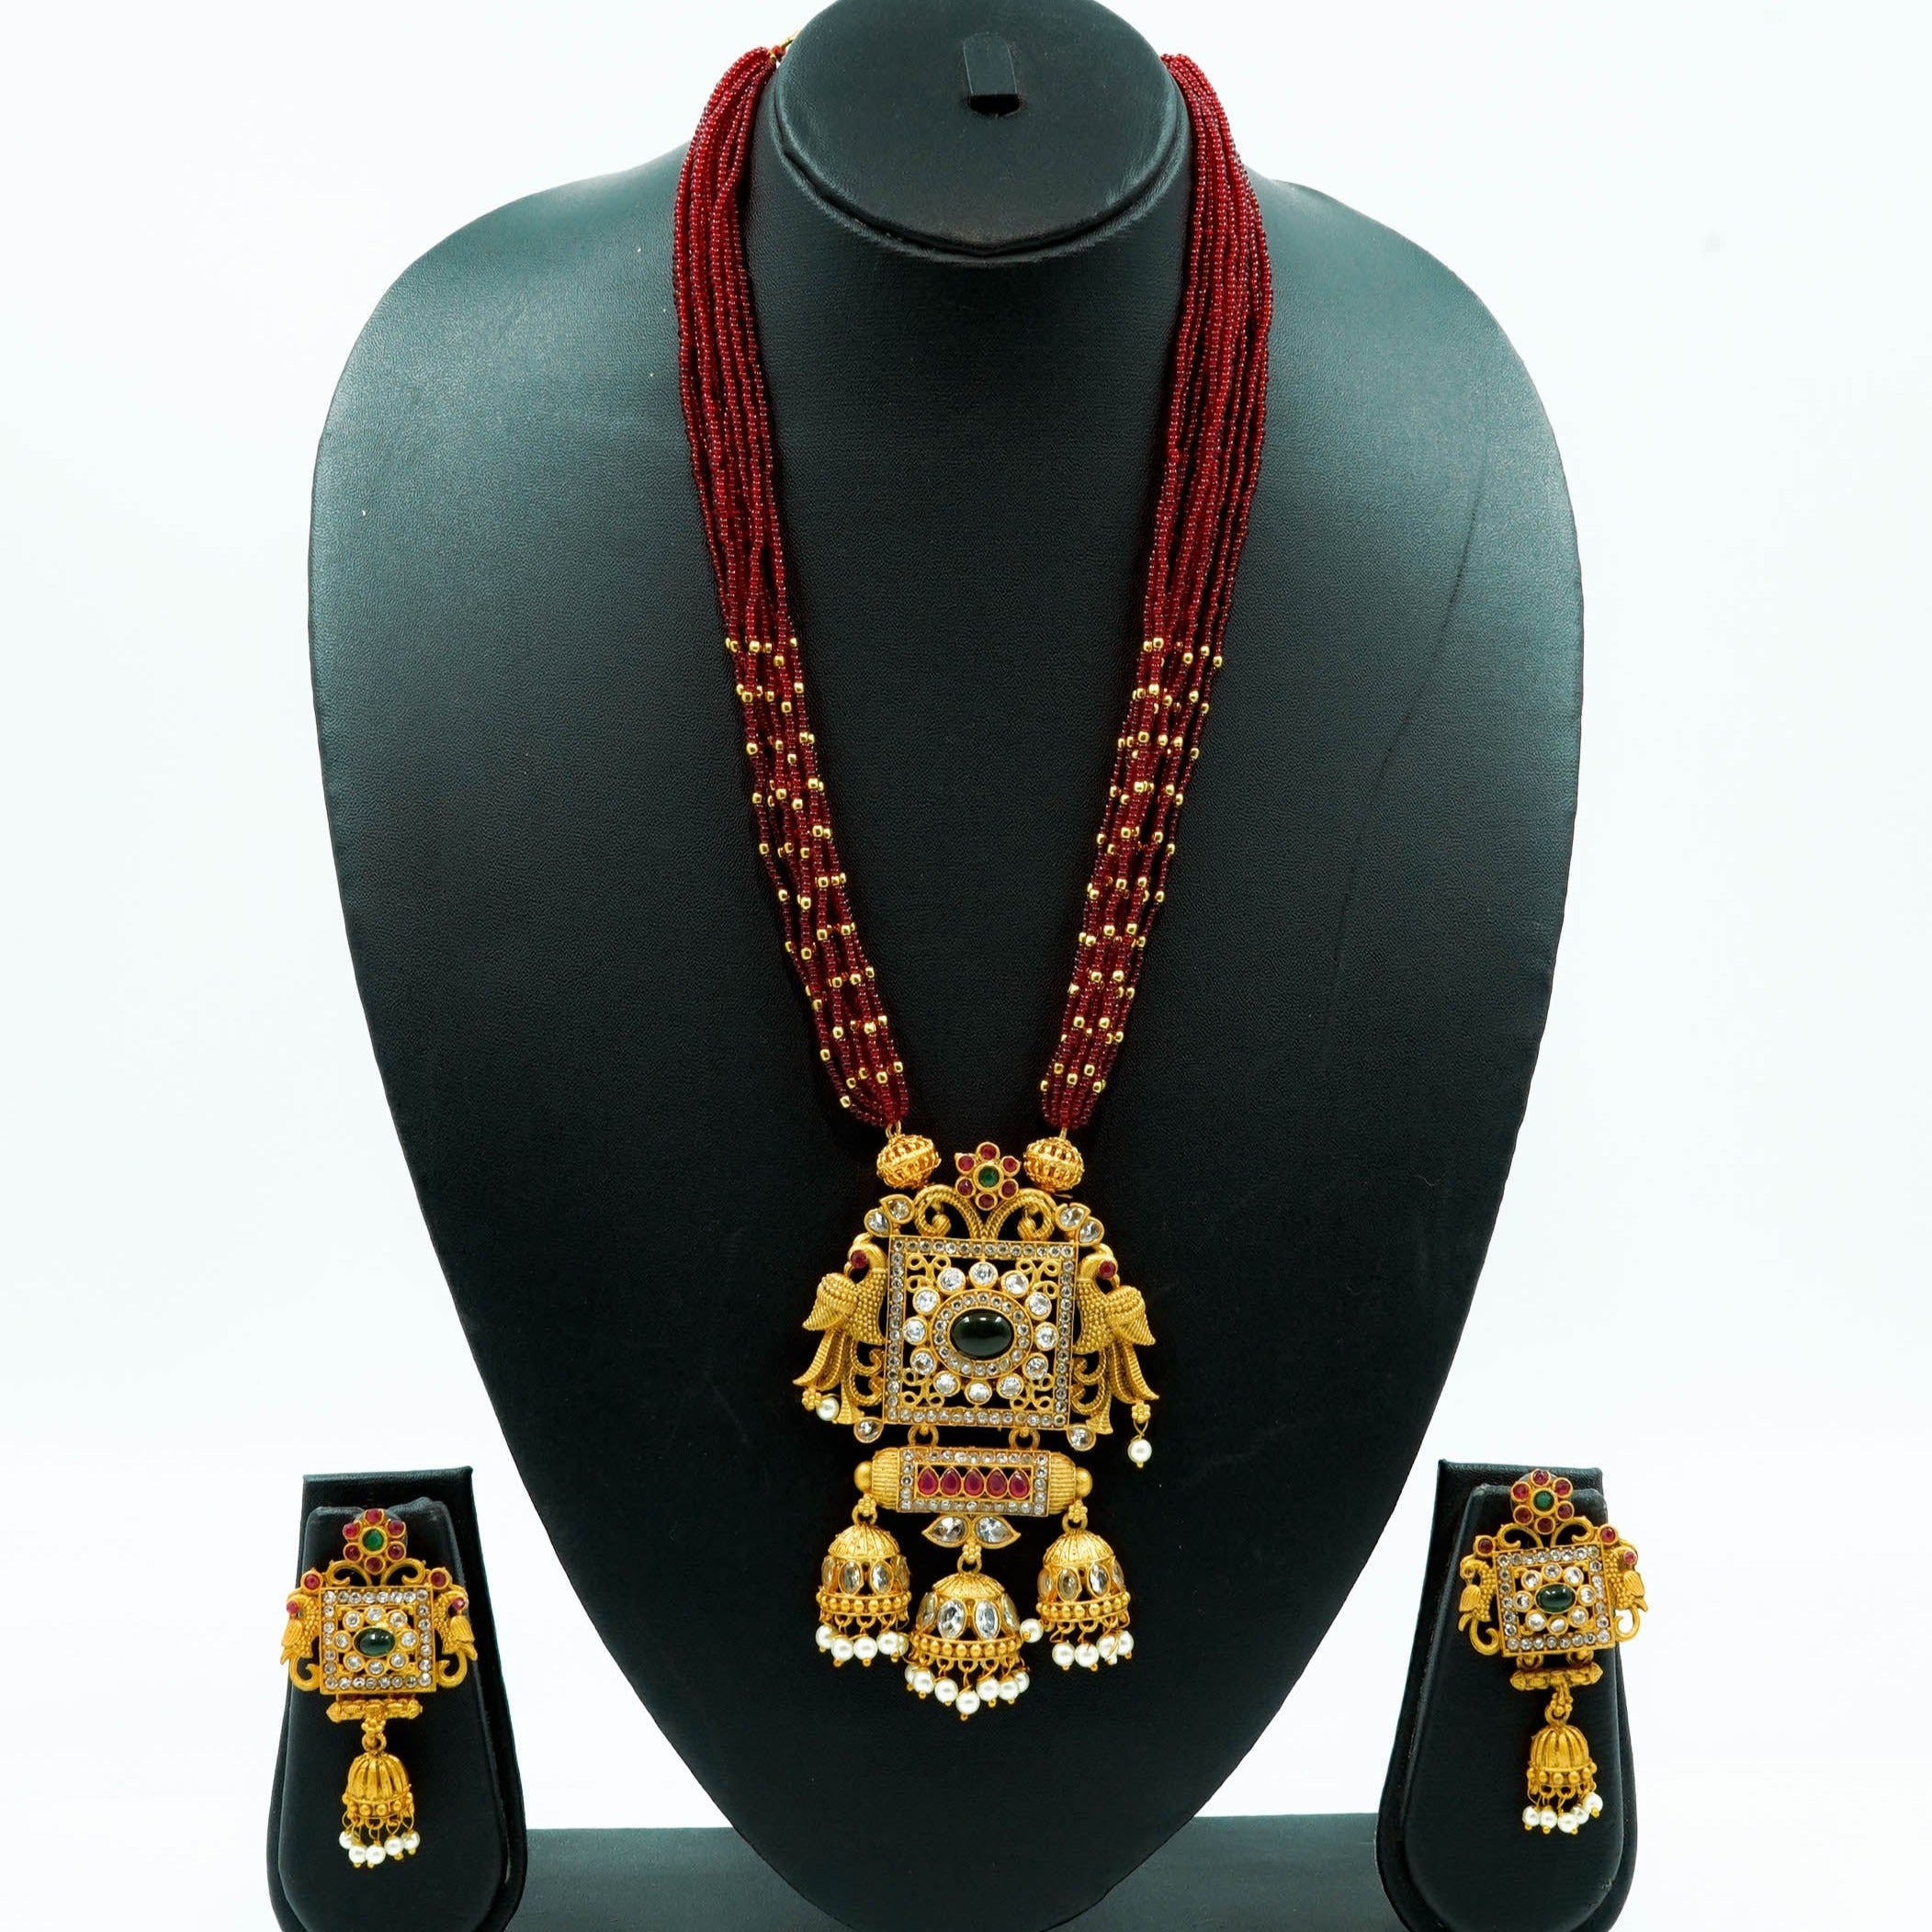 Premium quality Designer Long Necklace set with Crystal Mala 10352N